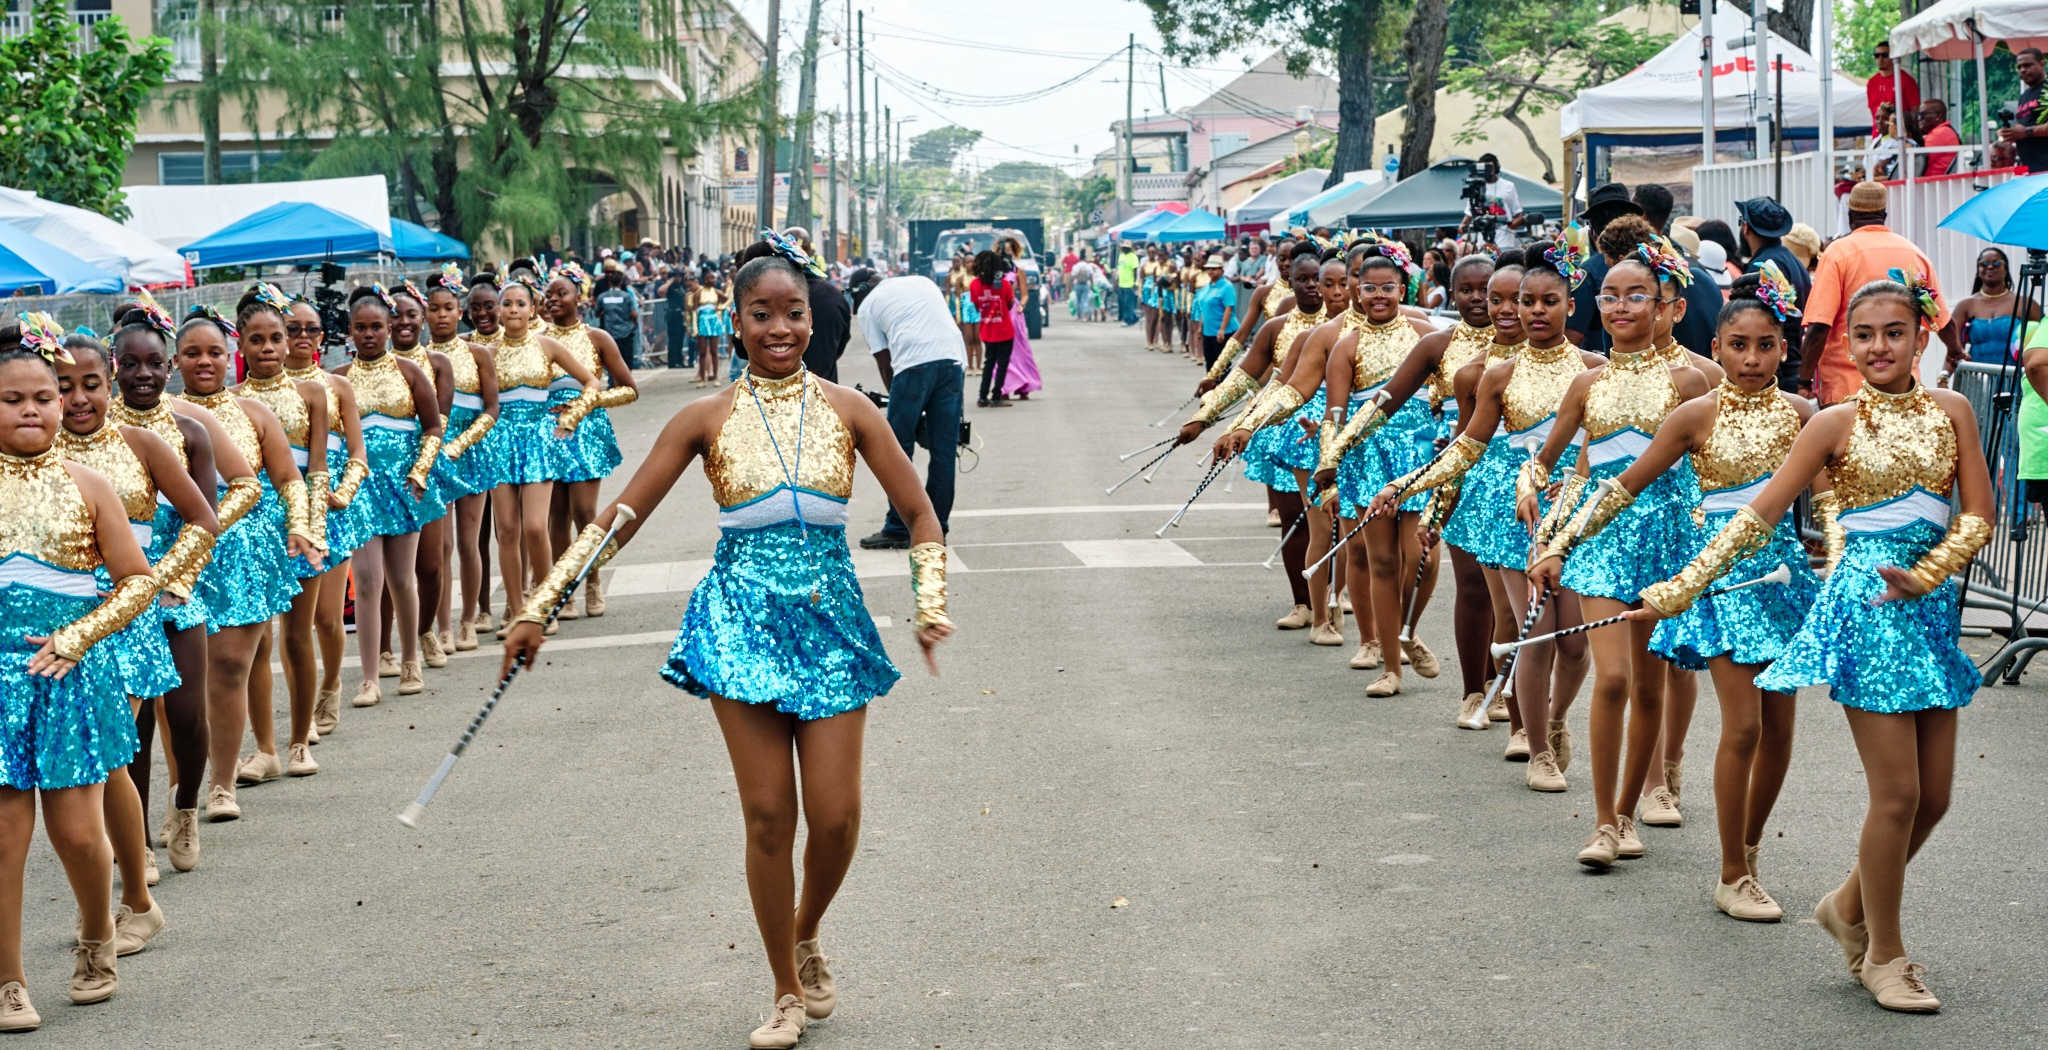 Parades Mark End of 70th Crucian Christmas Festival the First Full